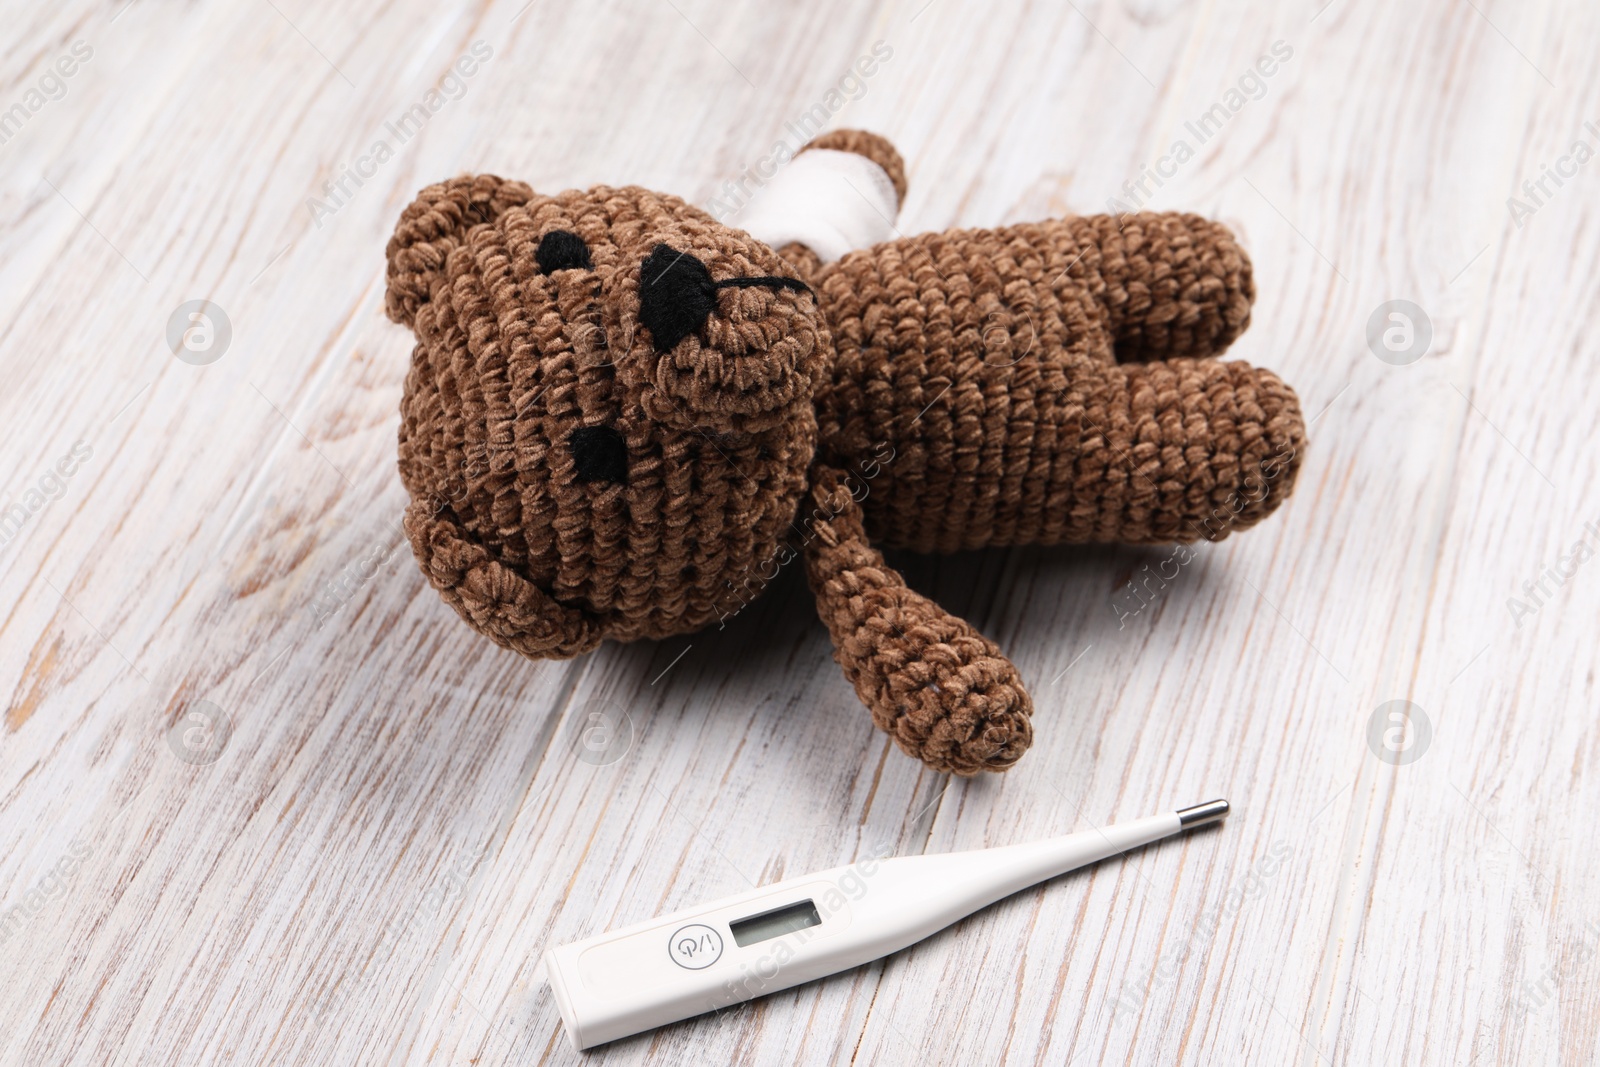 Photo of Toy bear and thermometer on wooden background